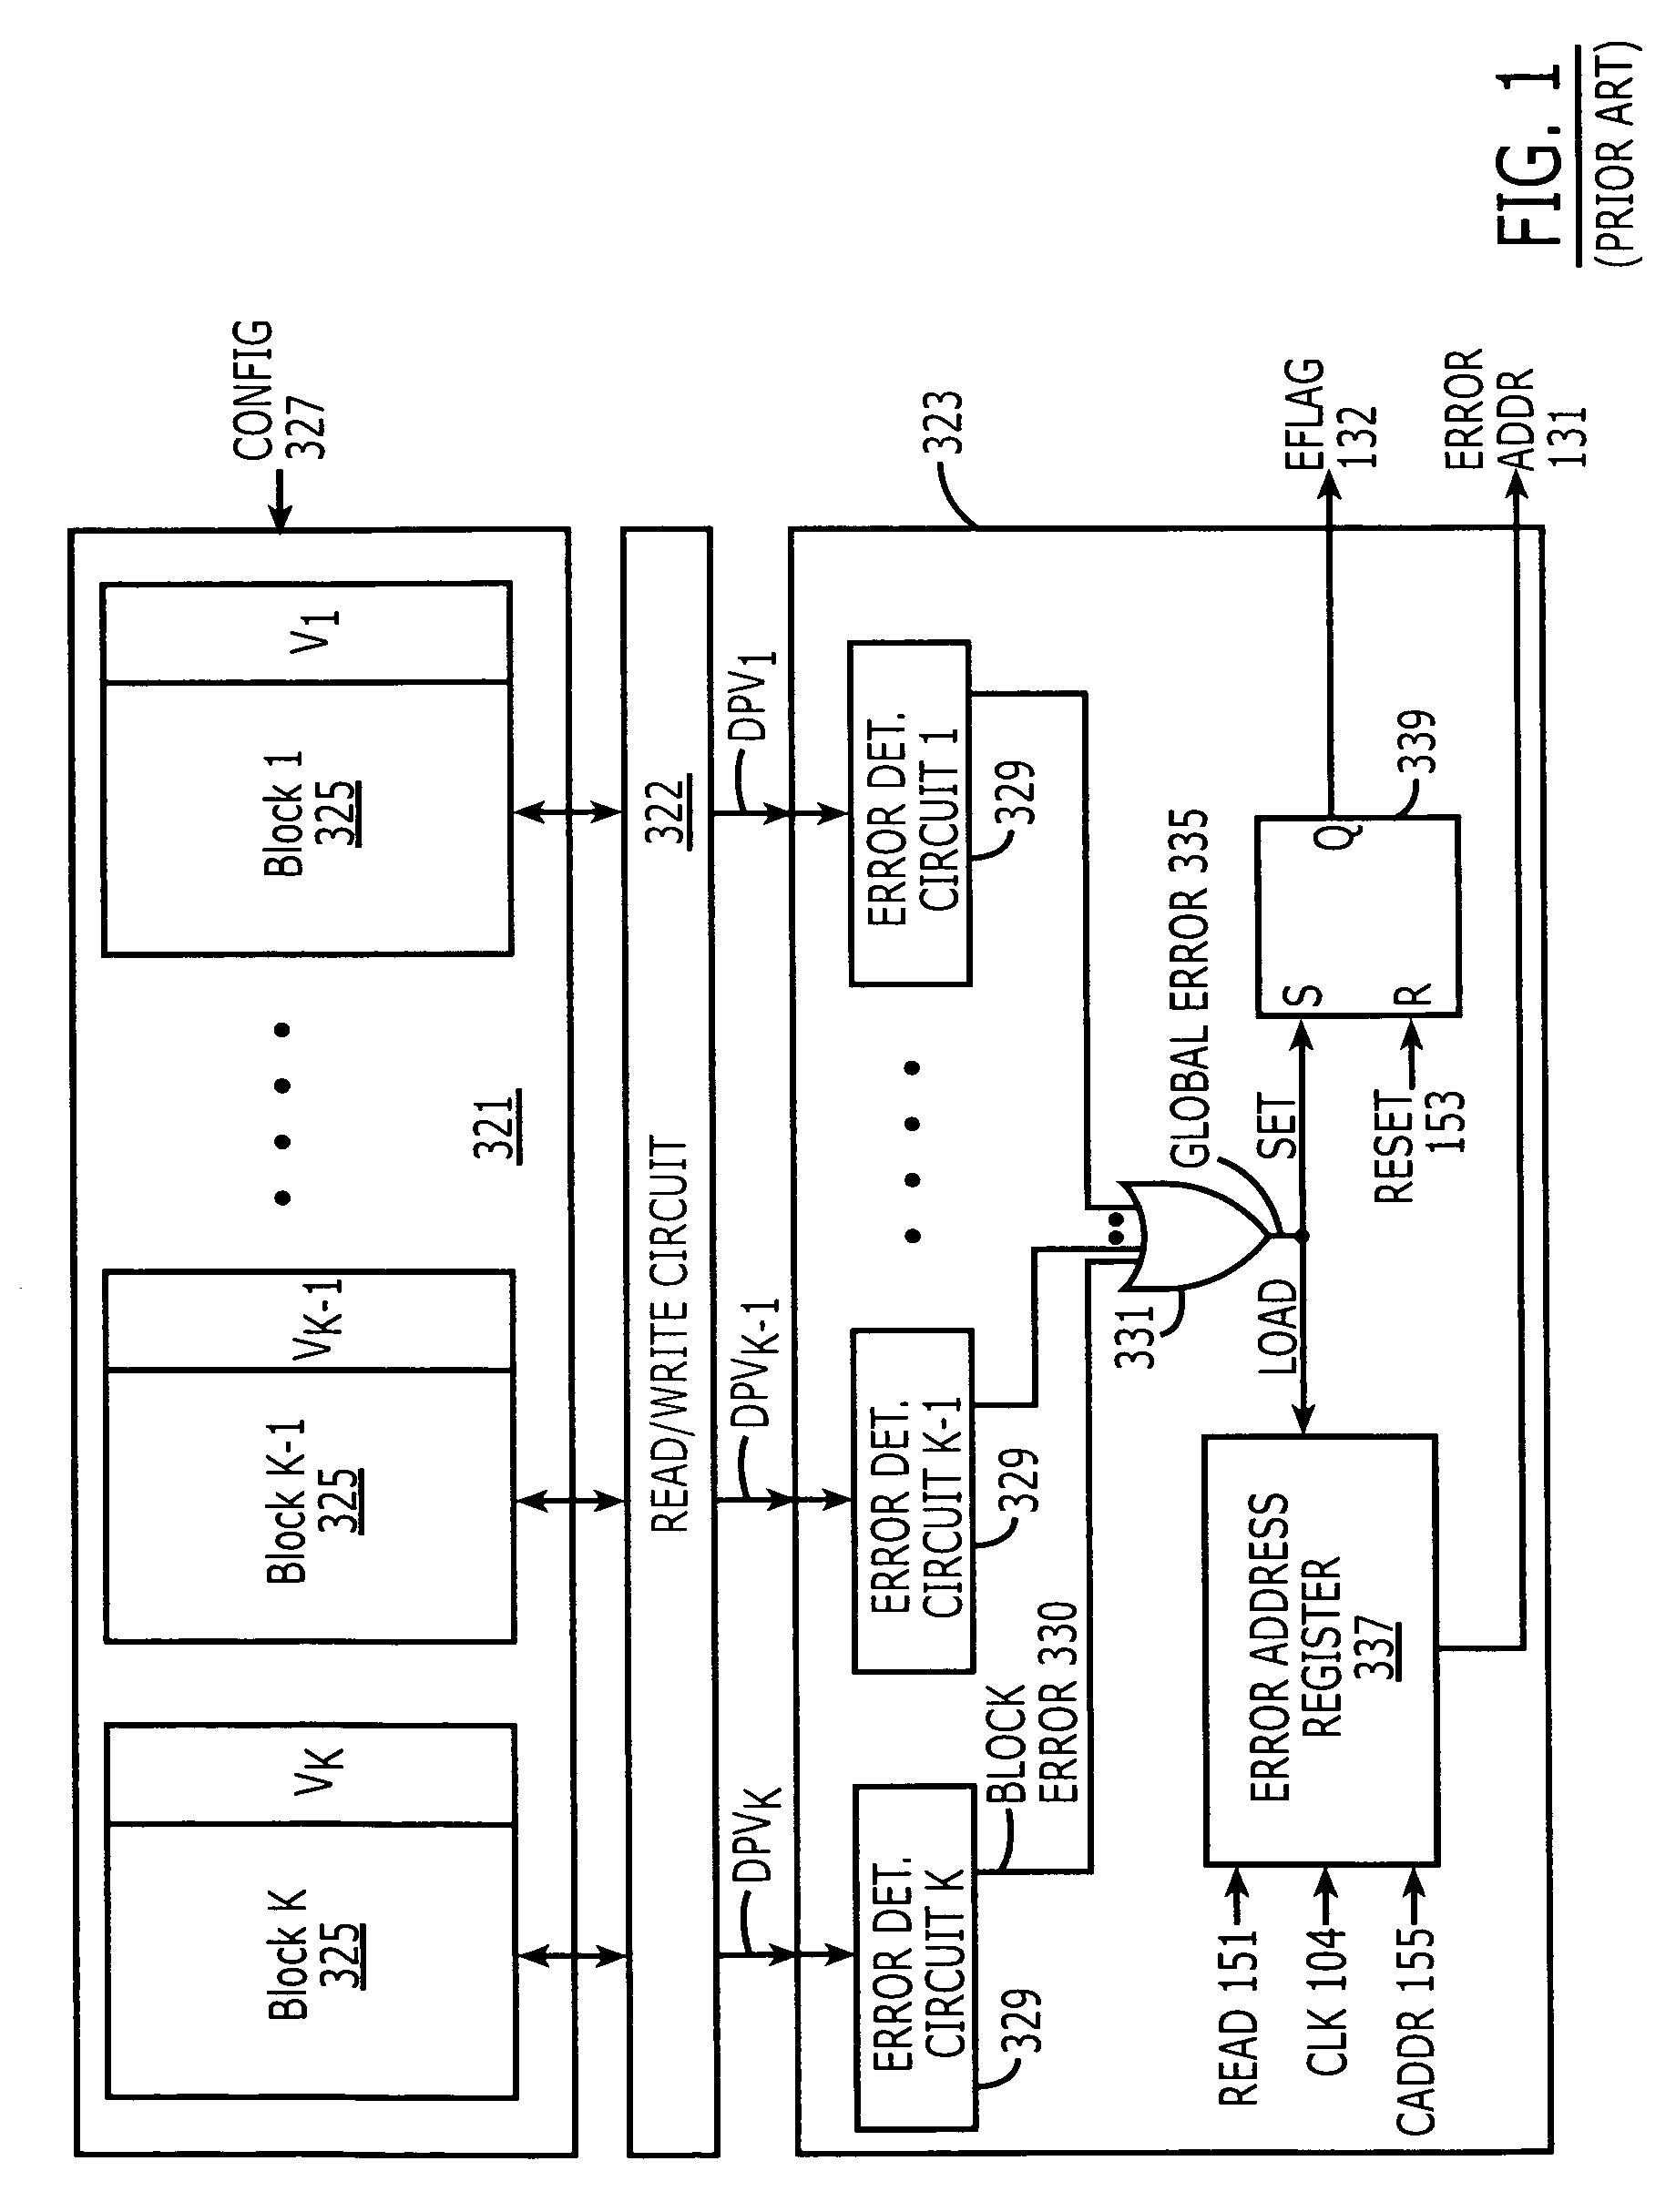 Content addressable memory (CAM) devices that support background BIST and BISR operations and methods of operating same